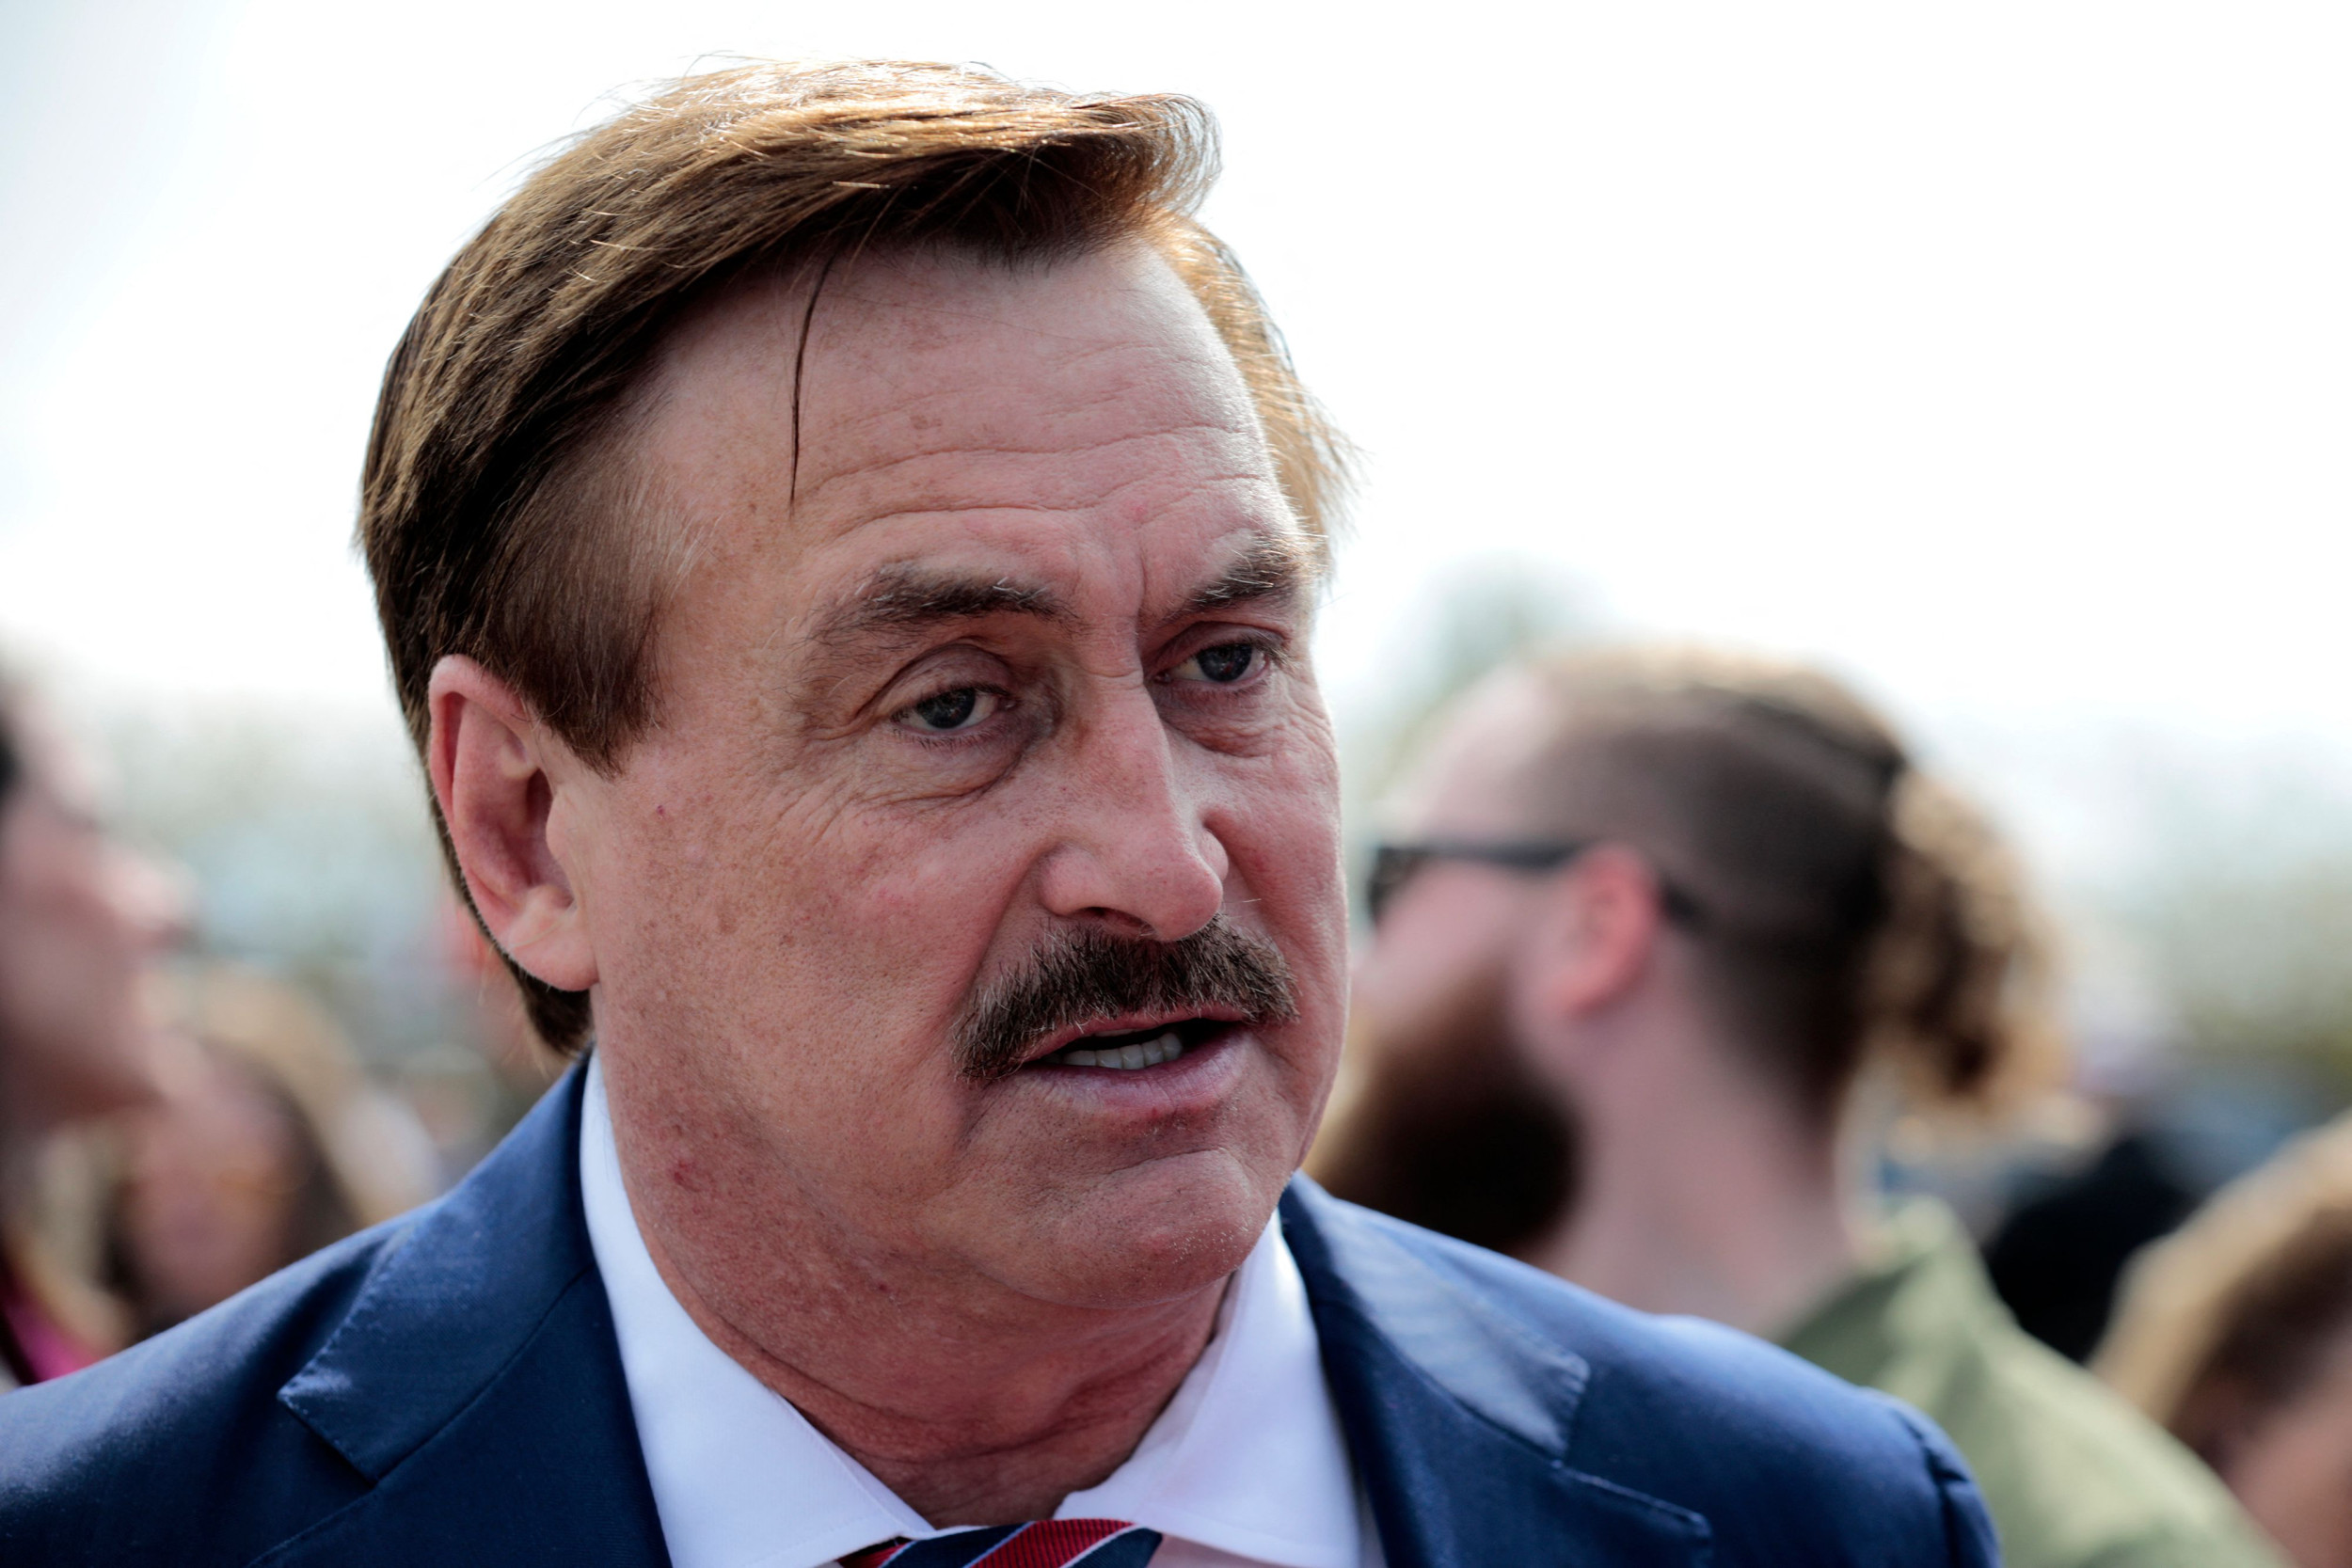 Mike Lindell's Newest & Best MyPillow! - My Pillow